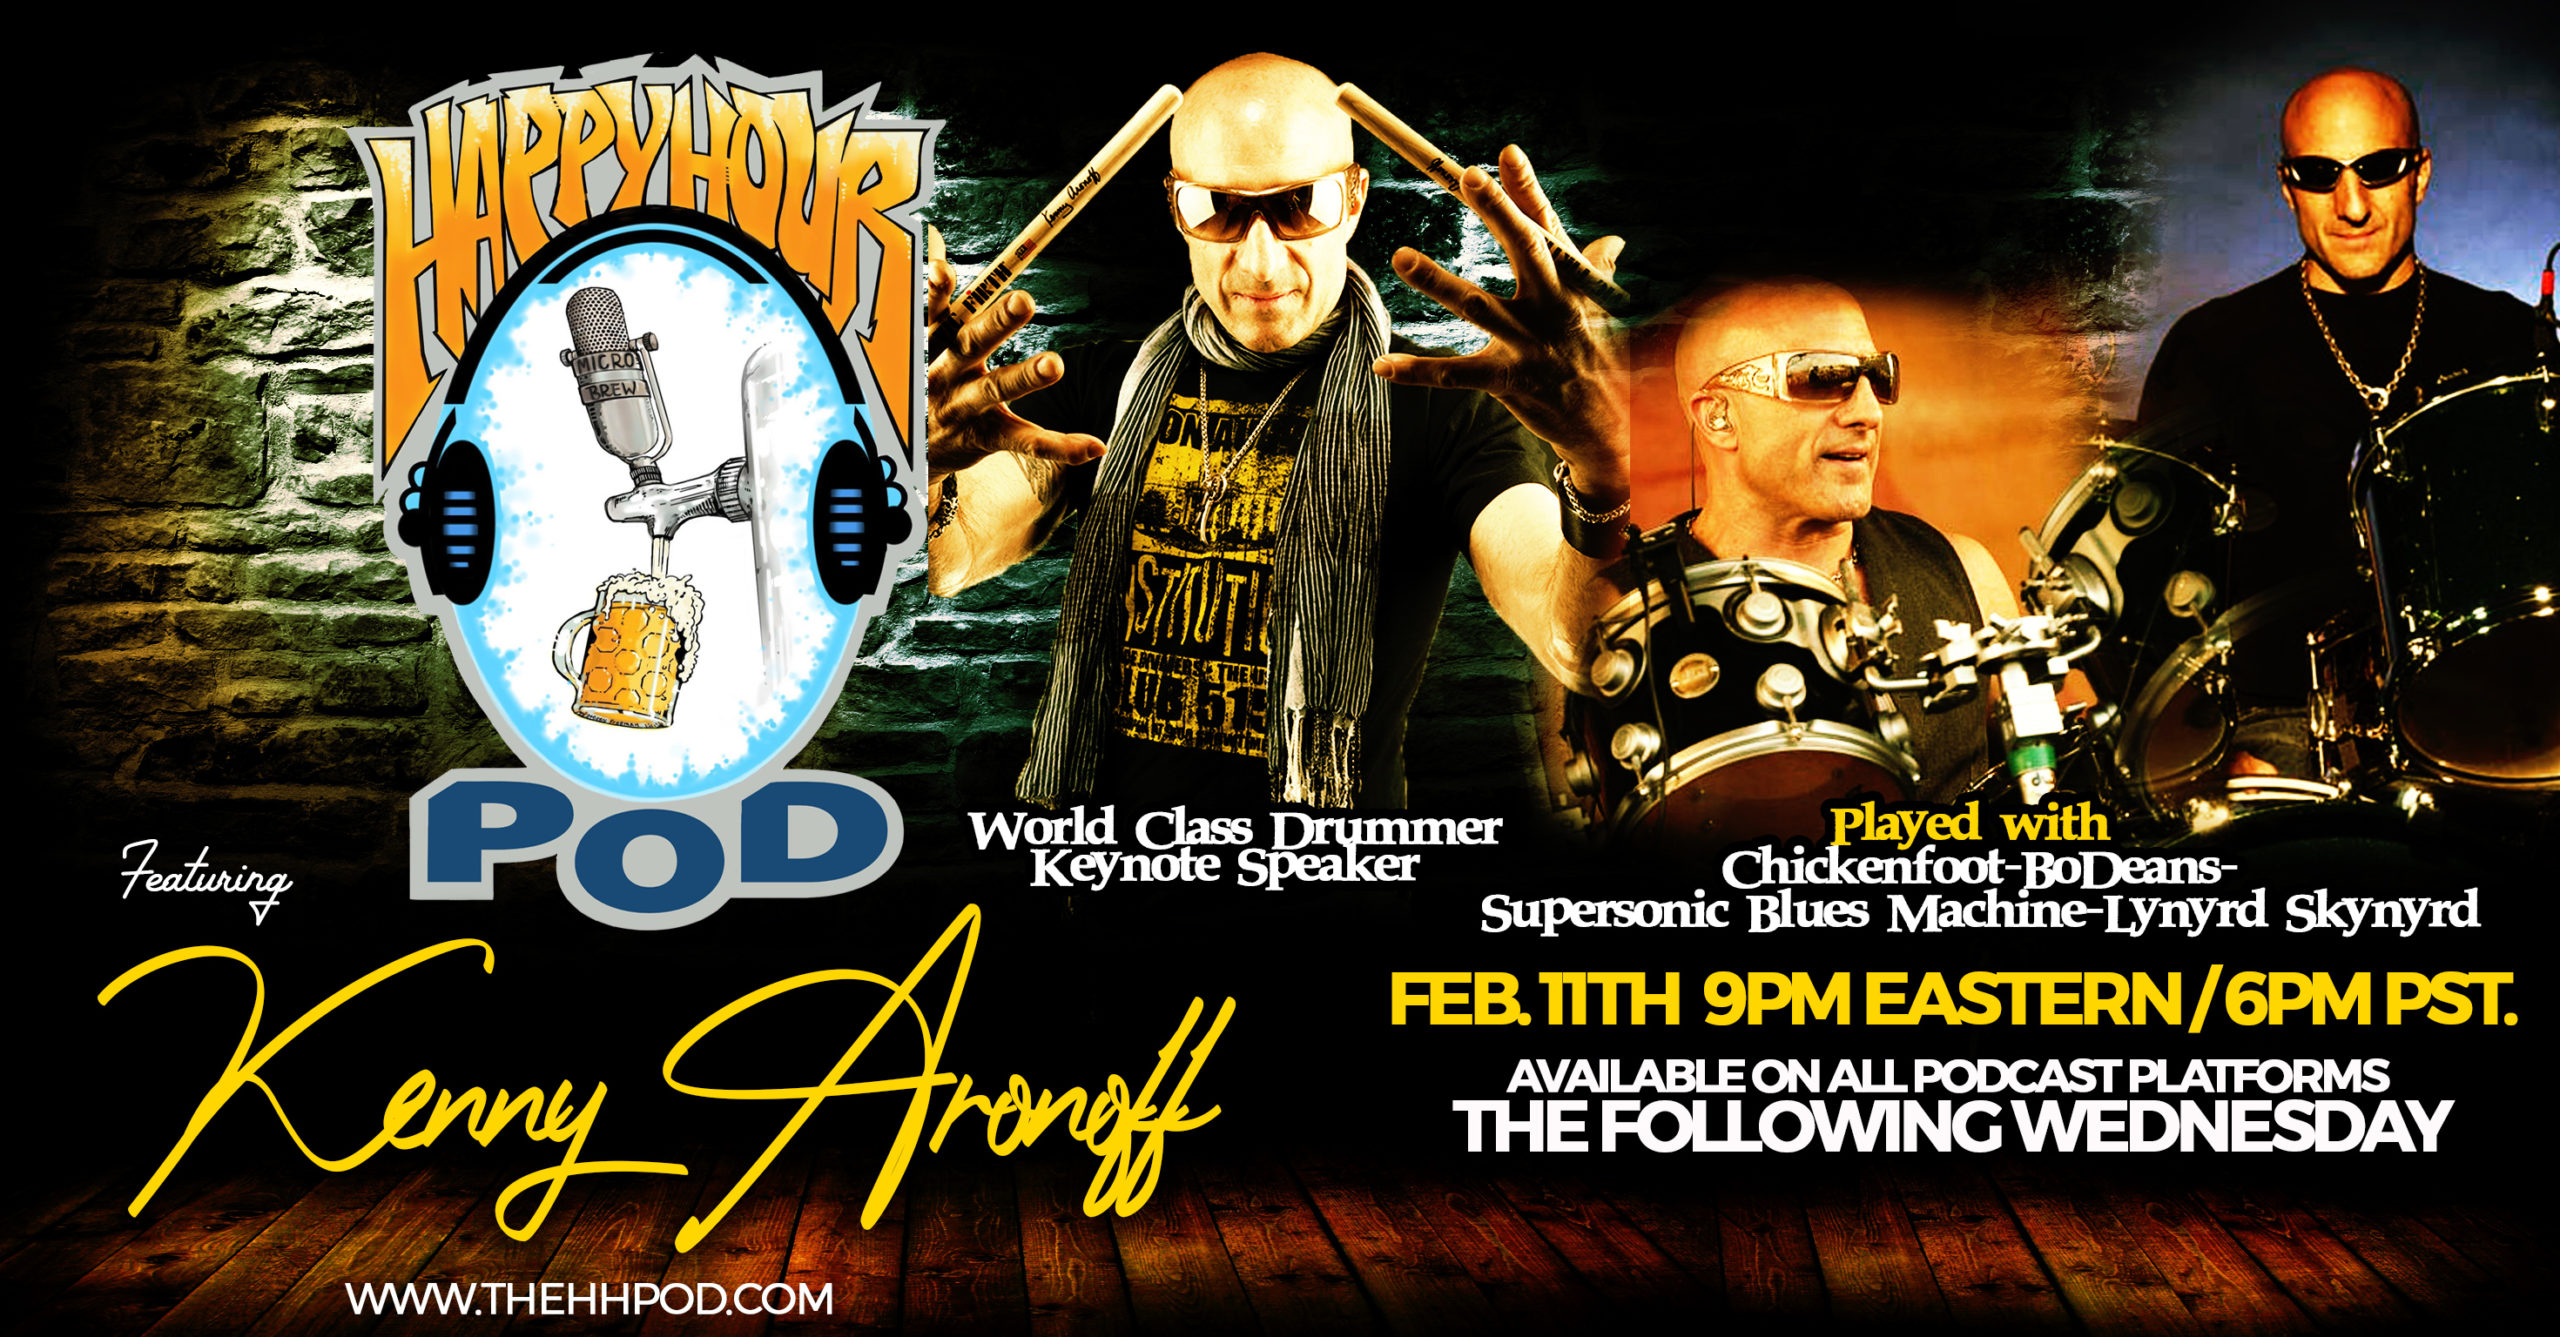 Featuring Kenny Aronoff 
Extended Video Version on Youtube